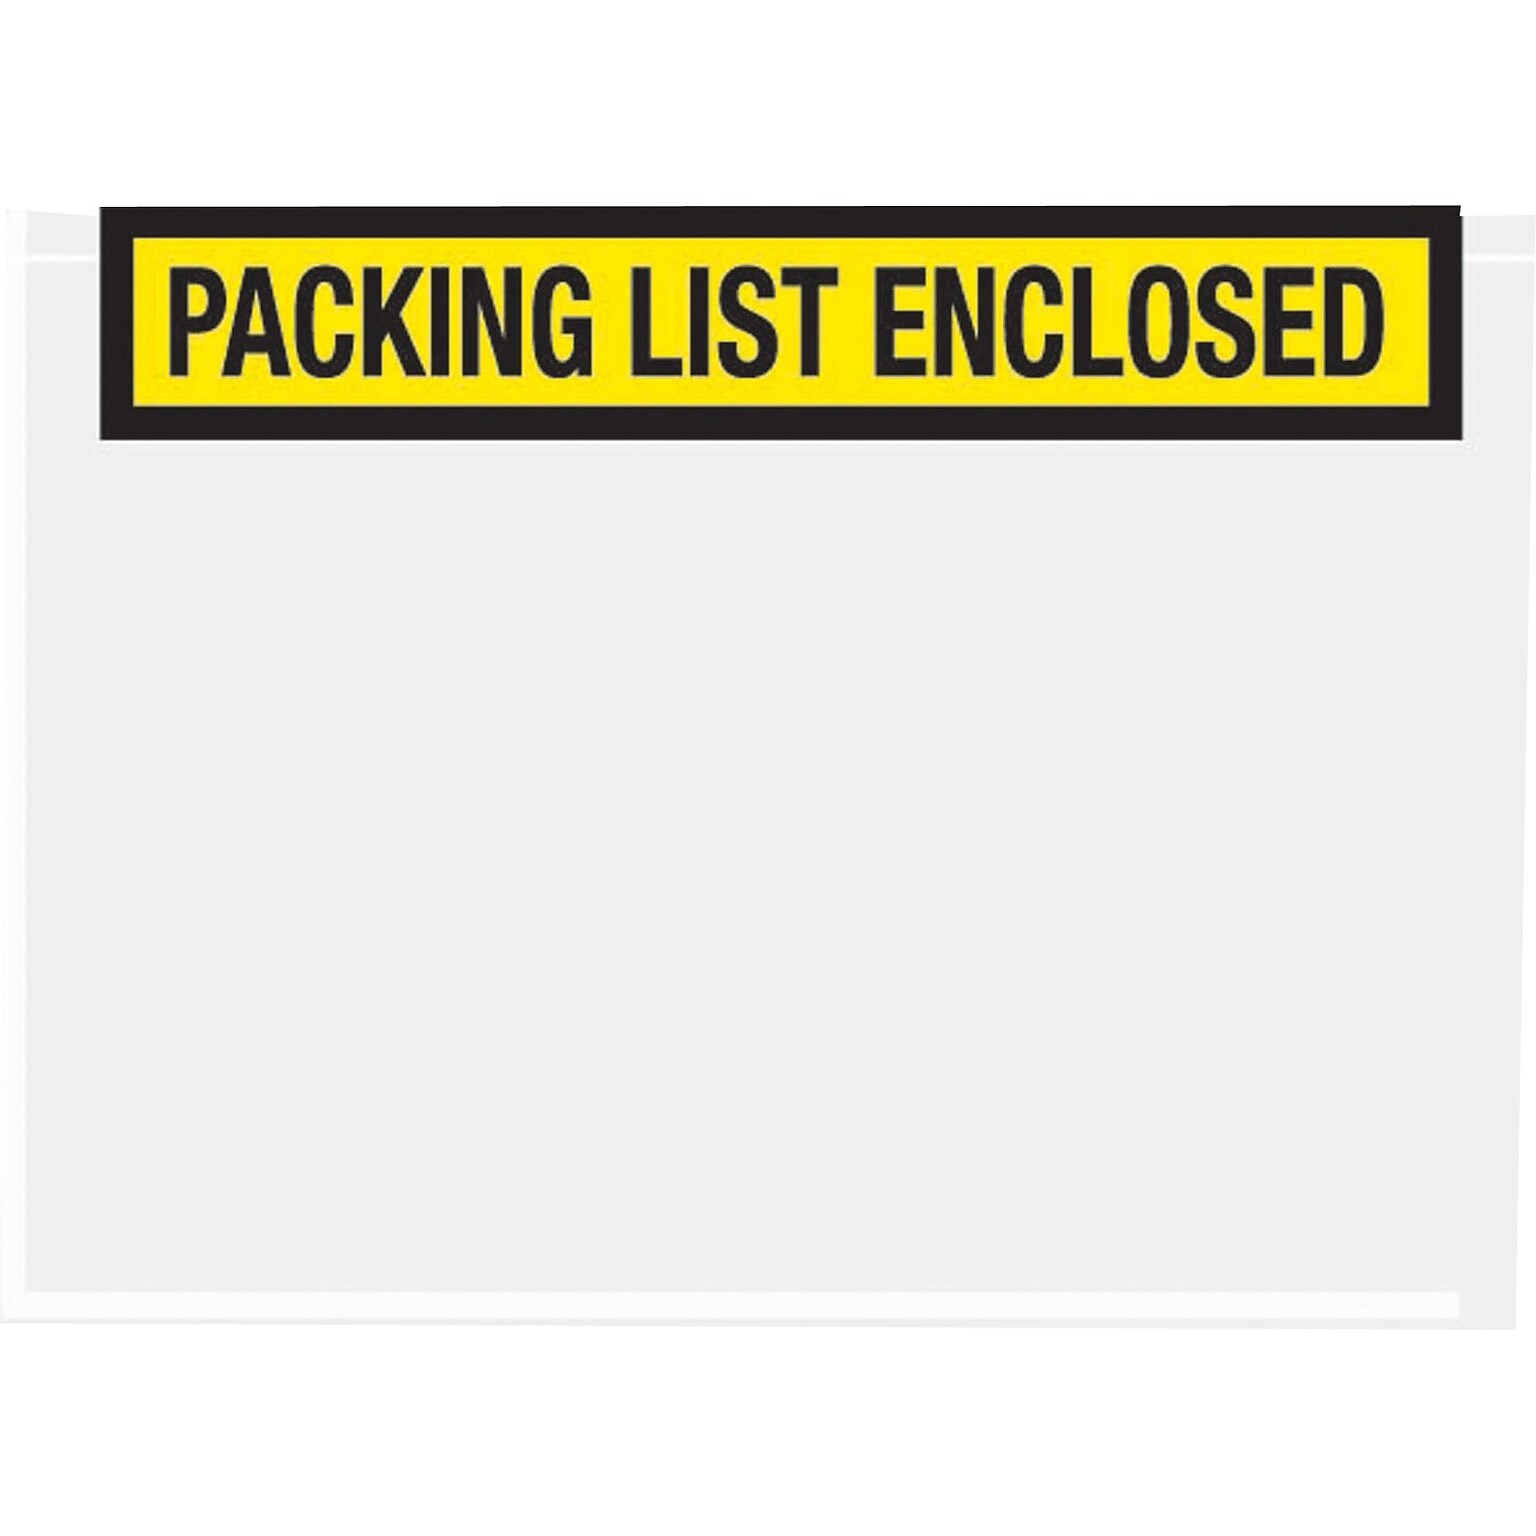 SI Products Packing List Envelopes, 7 x 5.5, Yellow Panel Face, Packing List Enclosed, 1000/Case (PL456)